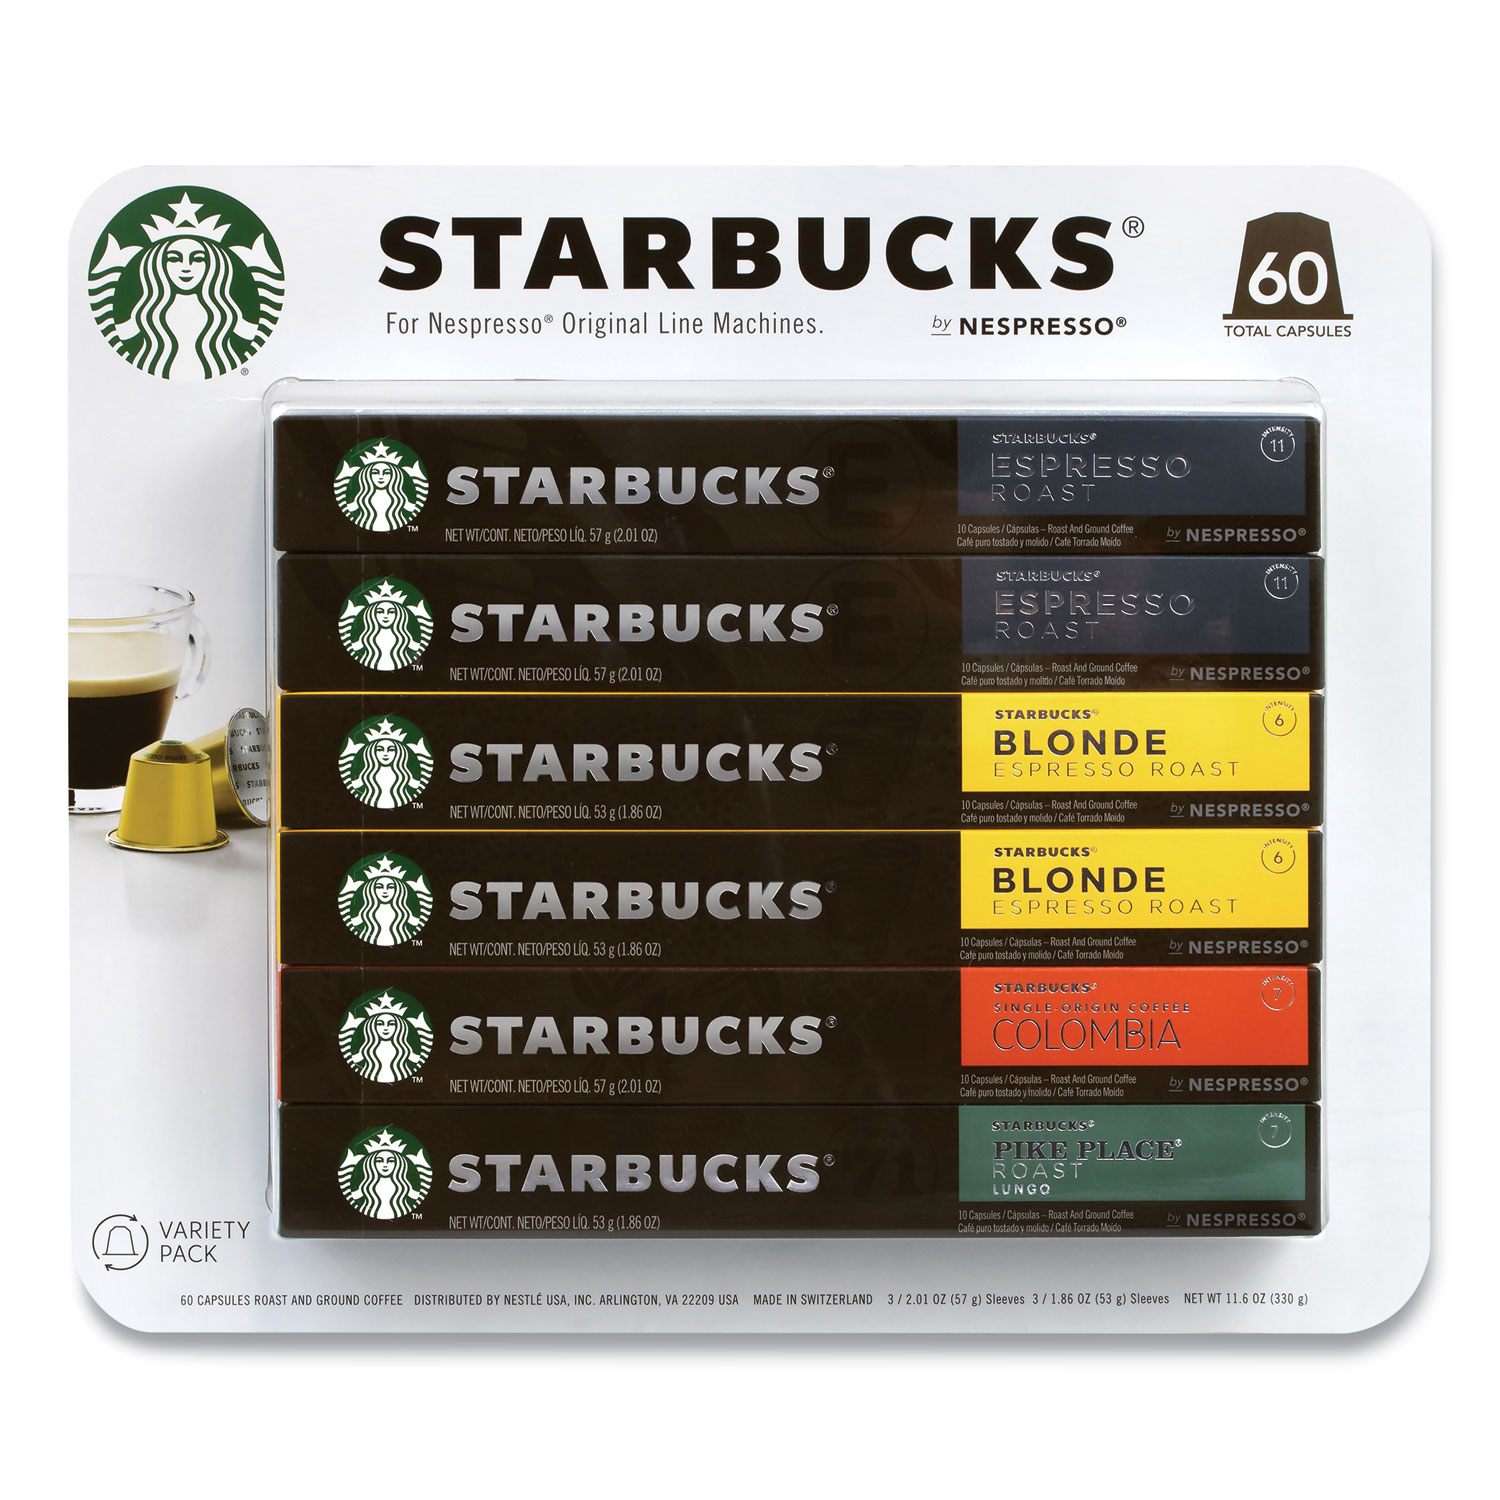 Starbucks® By NESPRESSO® Pods Variety Pack, Blonde Espresso/Colombia/Espresso/Pikes Place, 60 Pods/Pack, Free Delivery in 1-4 Business Days